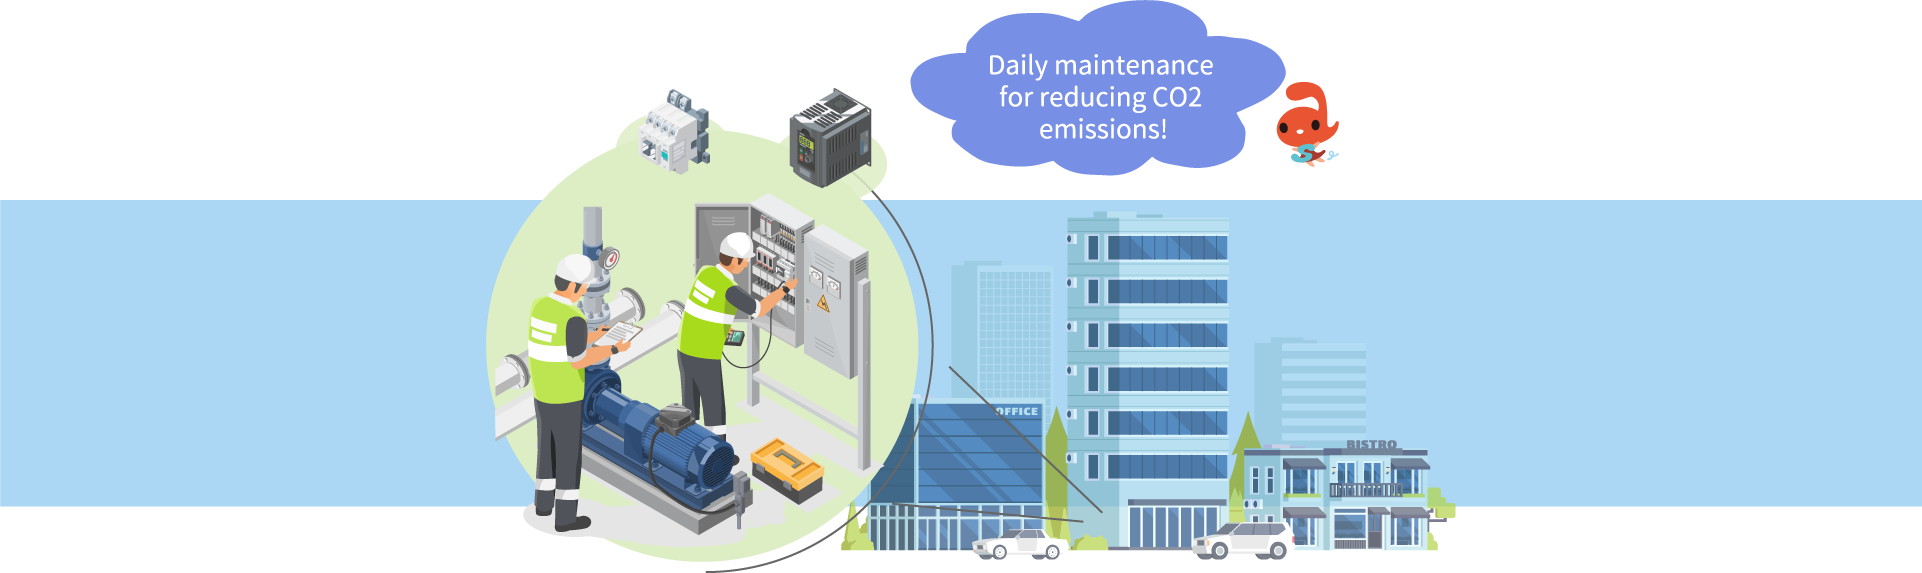 Daily maintenance for reducing CO2 emissions!